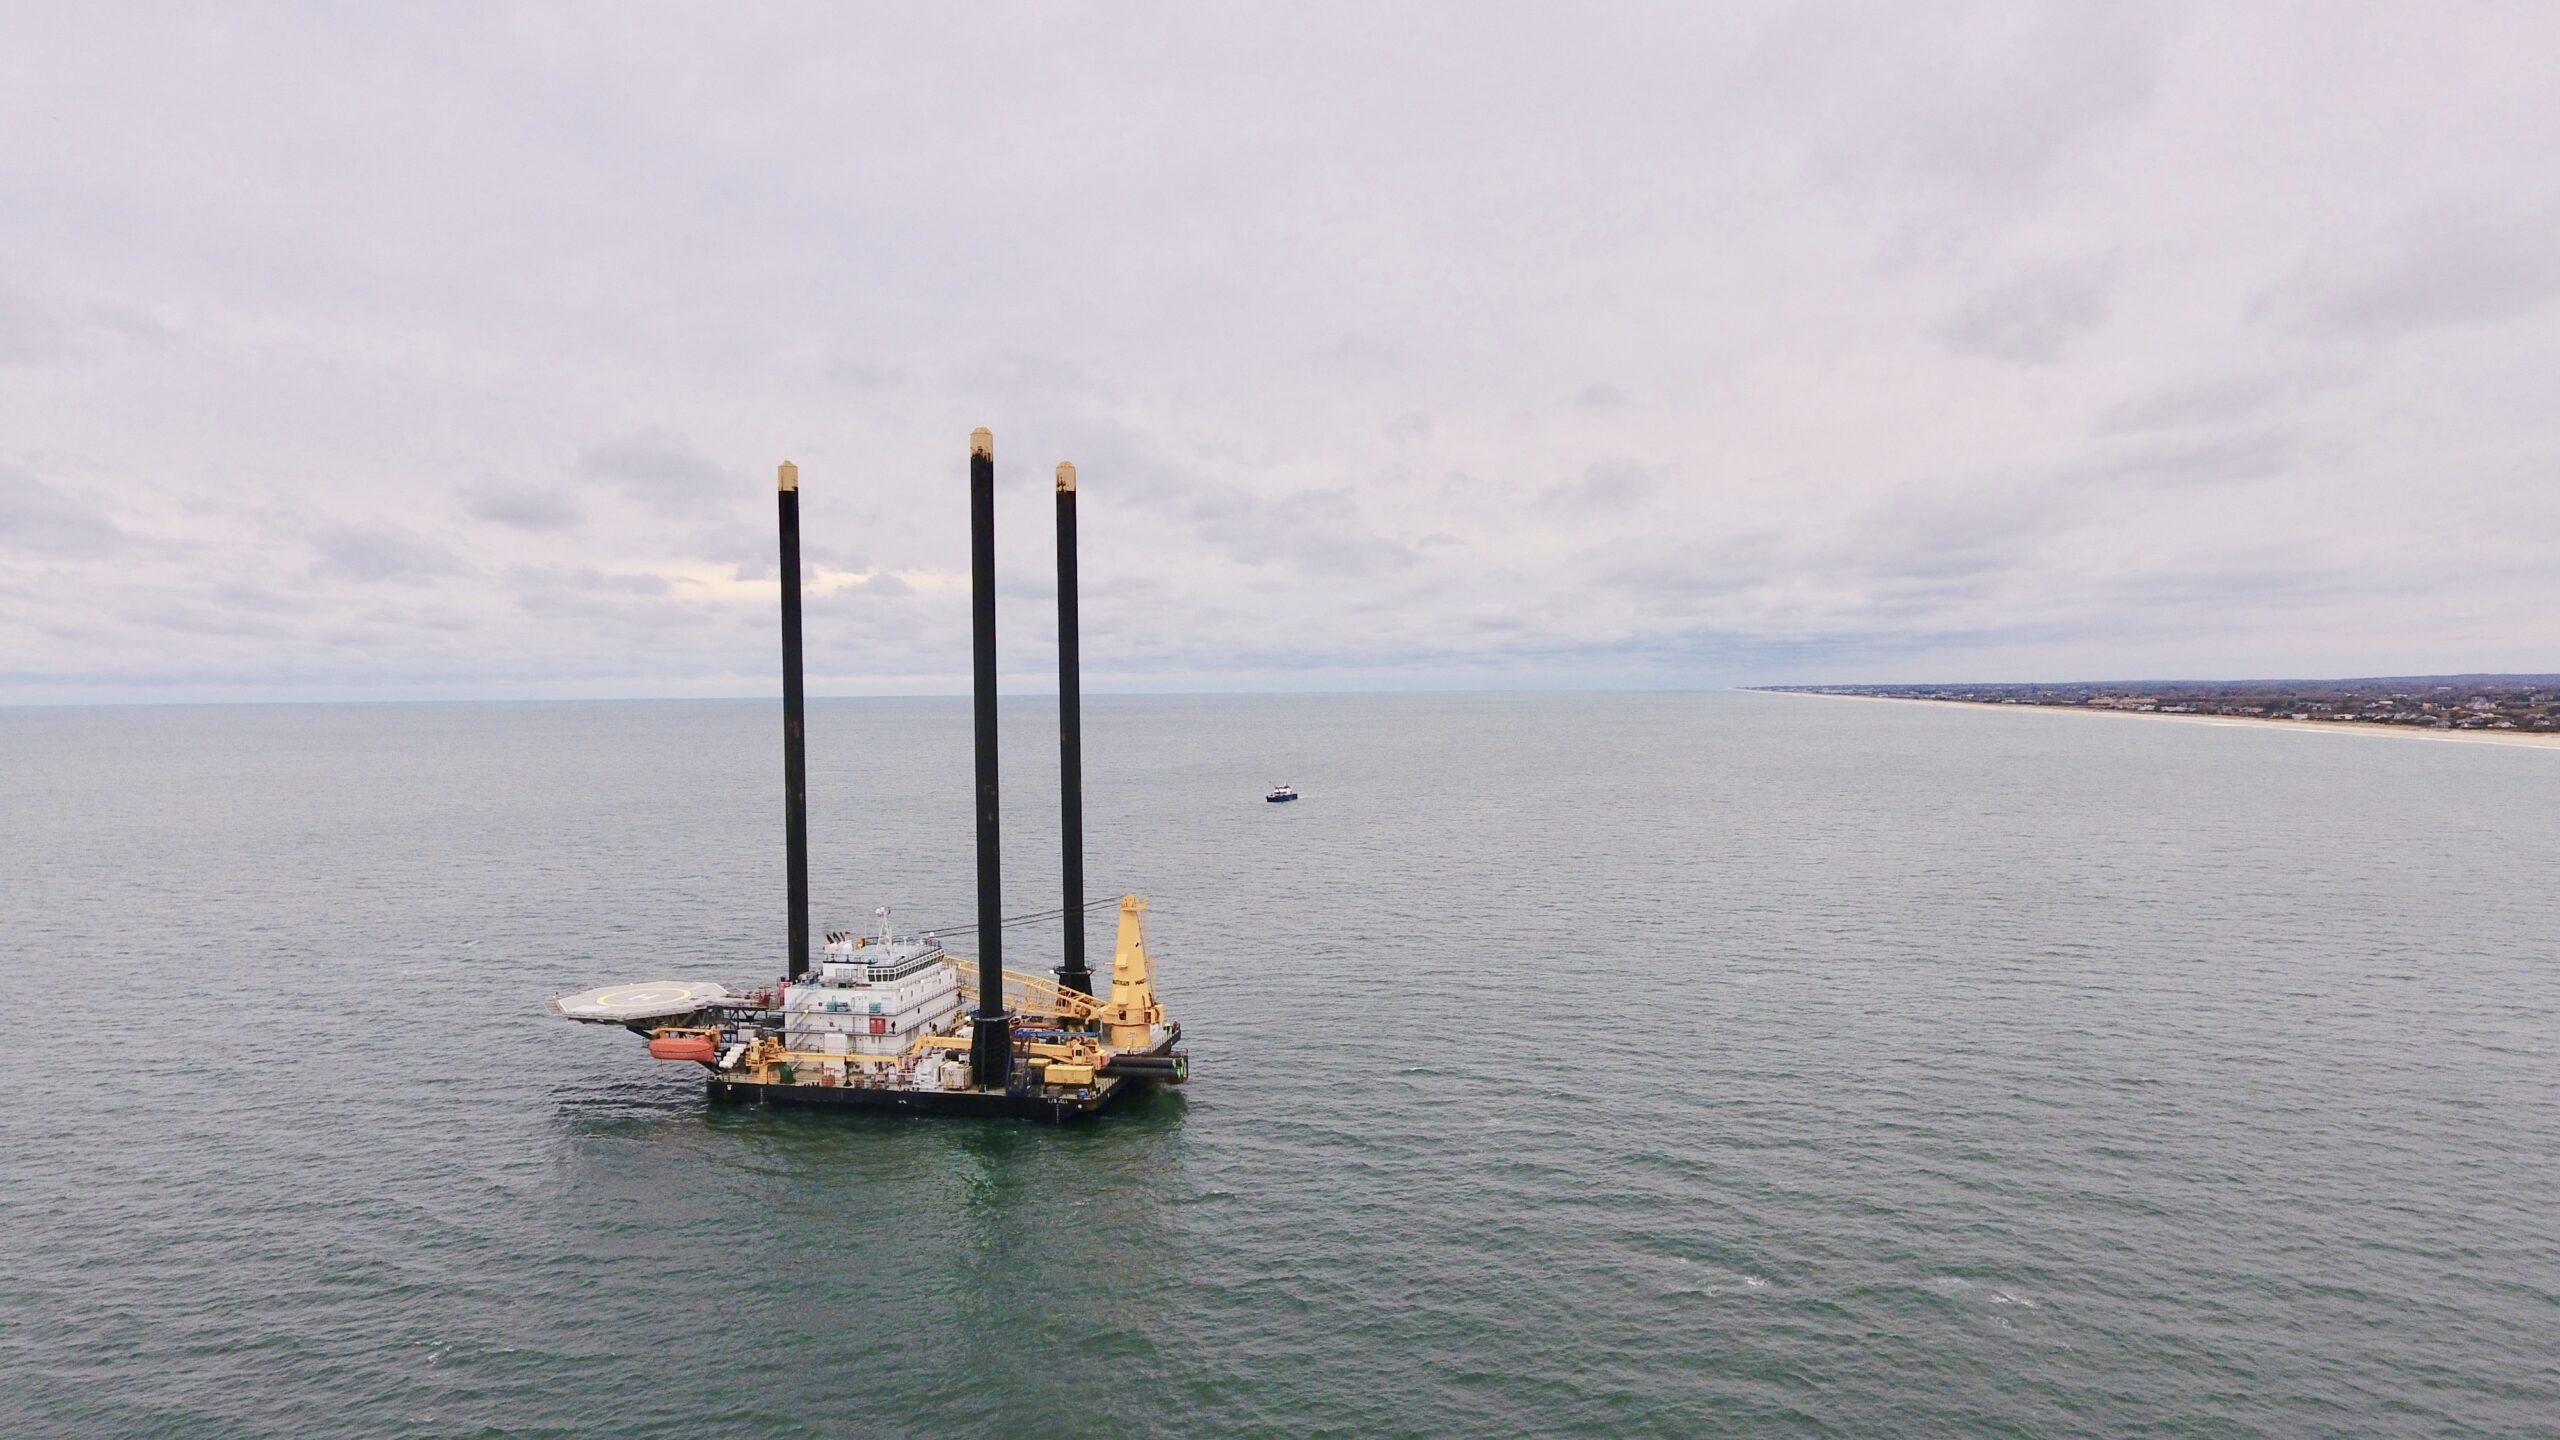 The lifeboat Jill arrived in the waters off Wainscott on Tuesday morning. The vessel, which can raise it's platform above the ocean waves, will serve as the work station for the offshore portion of the South Fork Wind power cable connection.